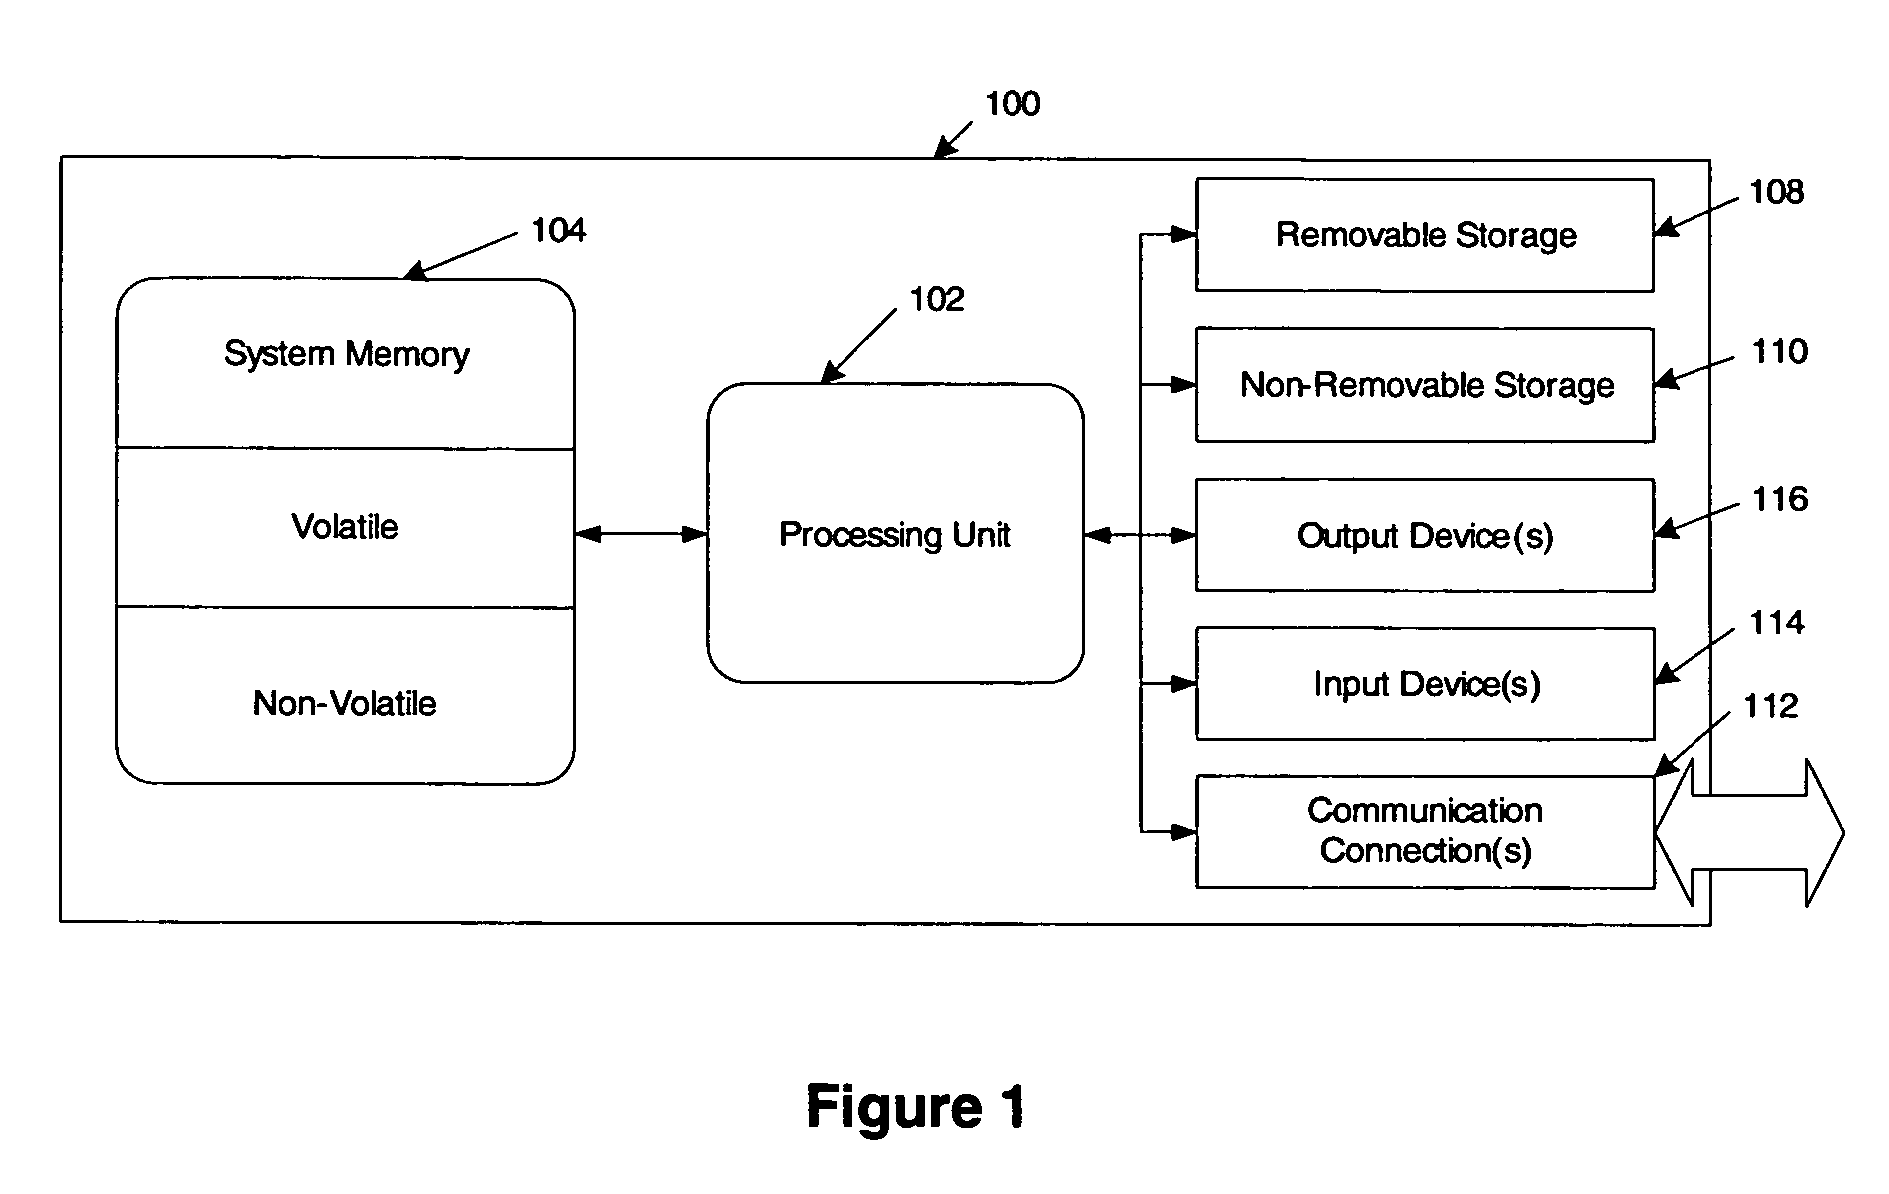 Direct navigation of two-dimensional control using a three-dimensional pointing device